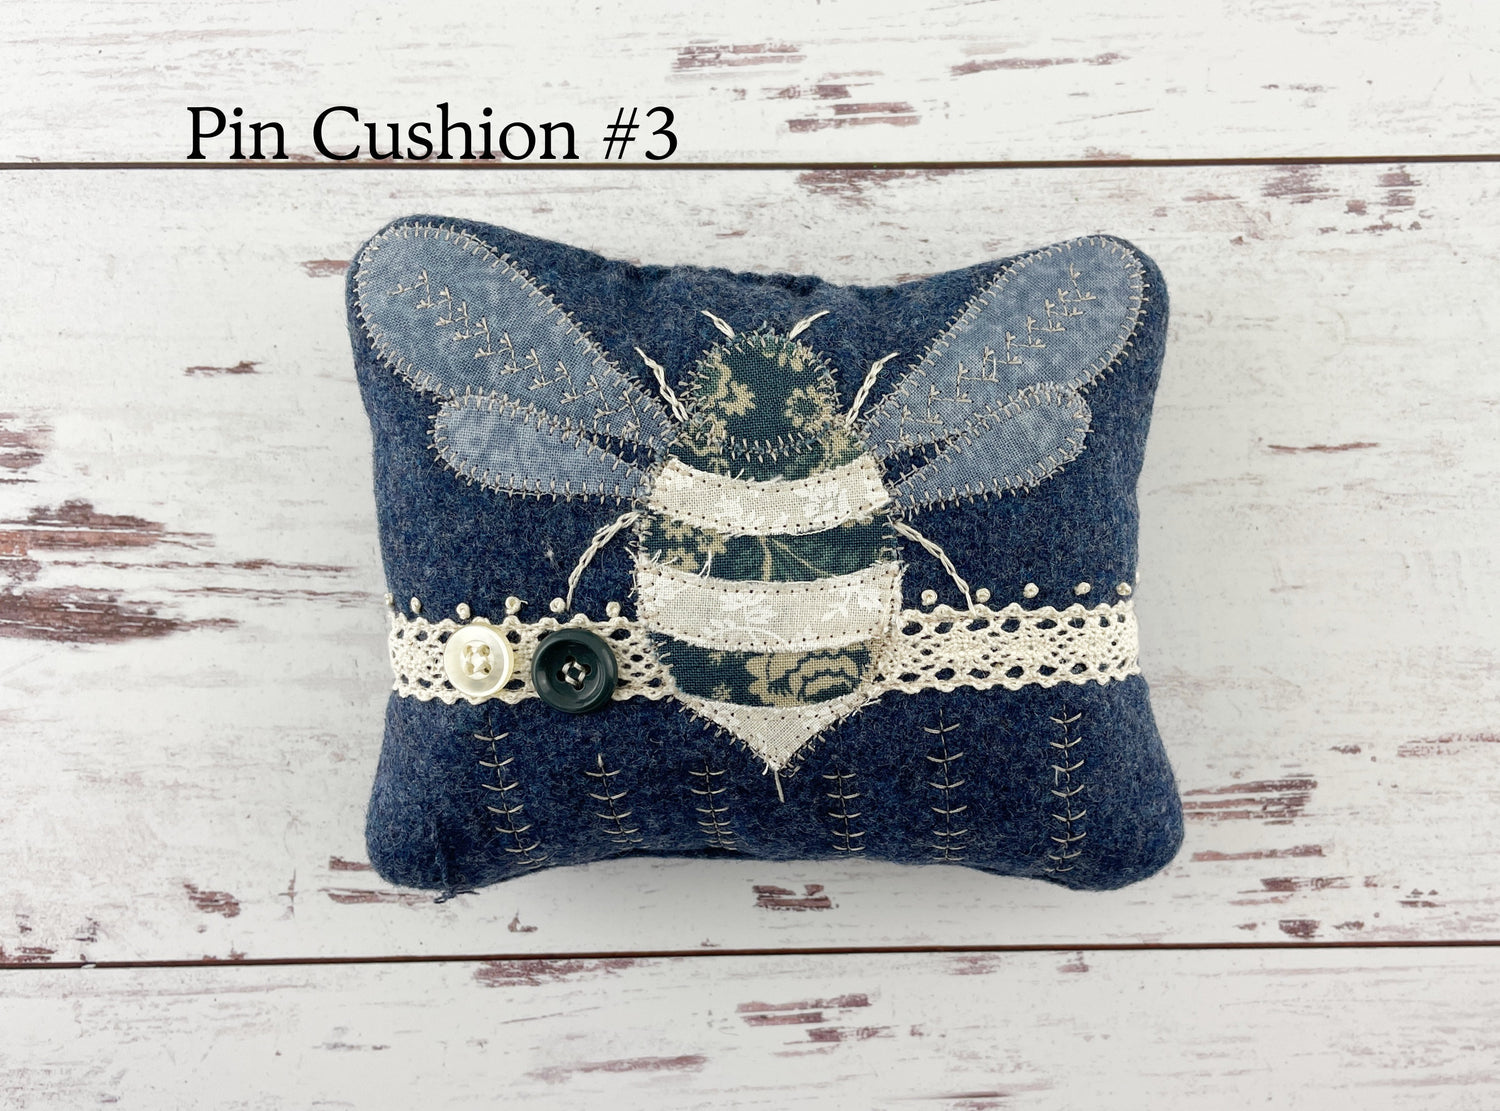 Handmade Bee Pin Cushion for the Sew-ist / One-of-a-Kind Appliqued and Embroidered Pin Cushion